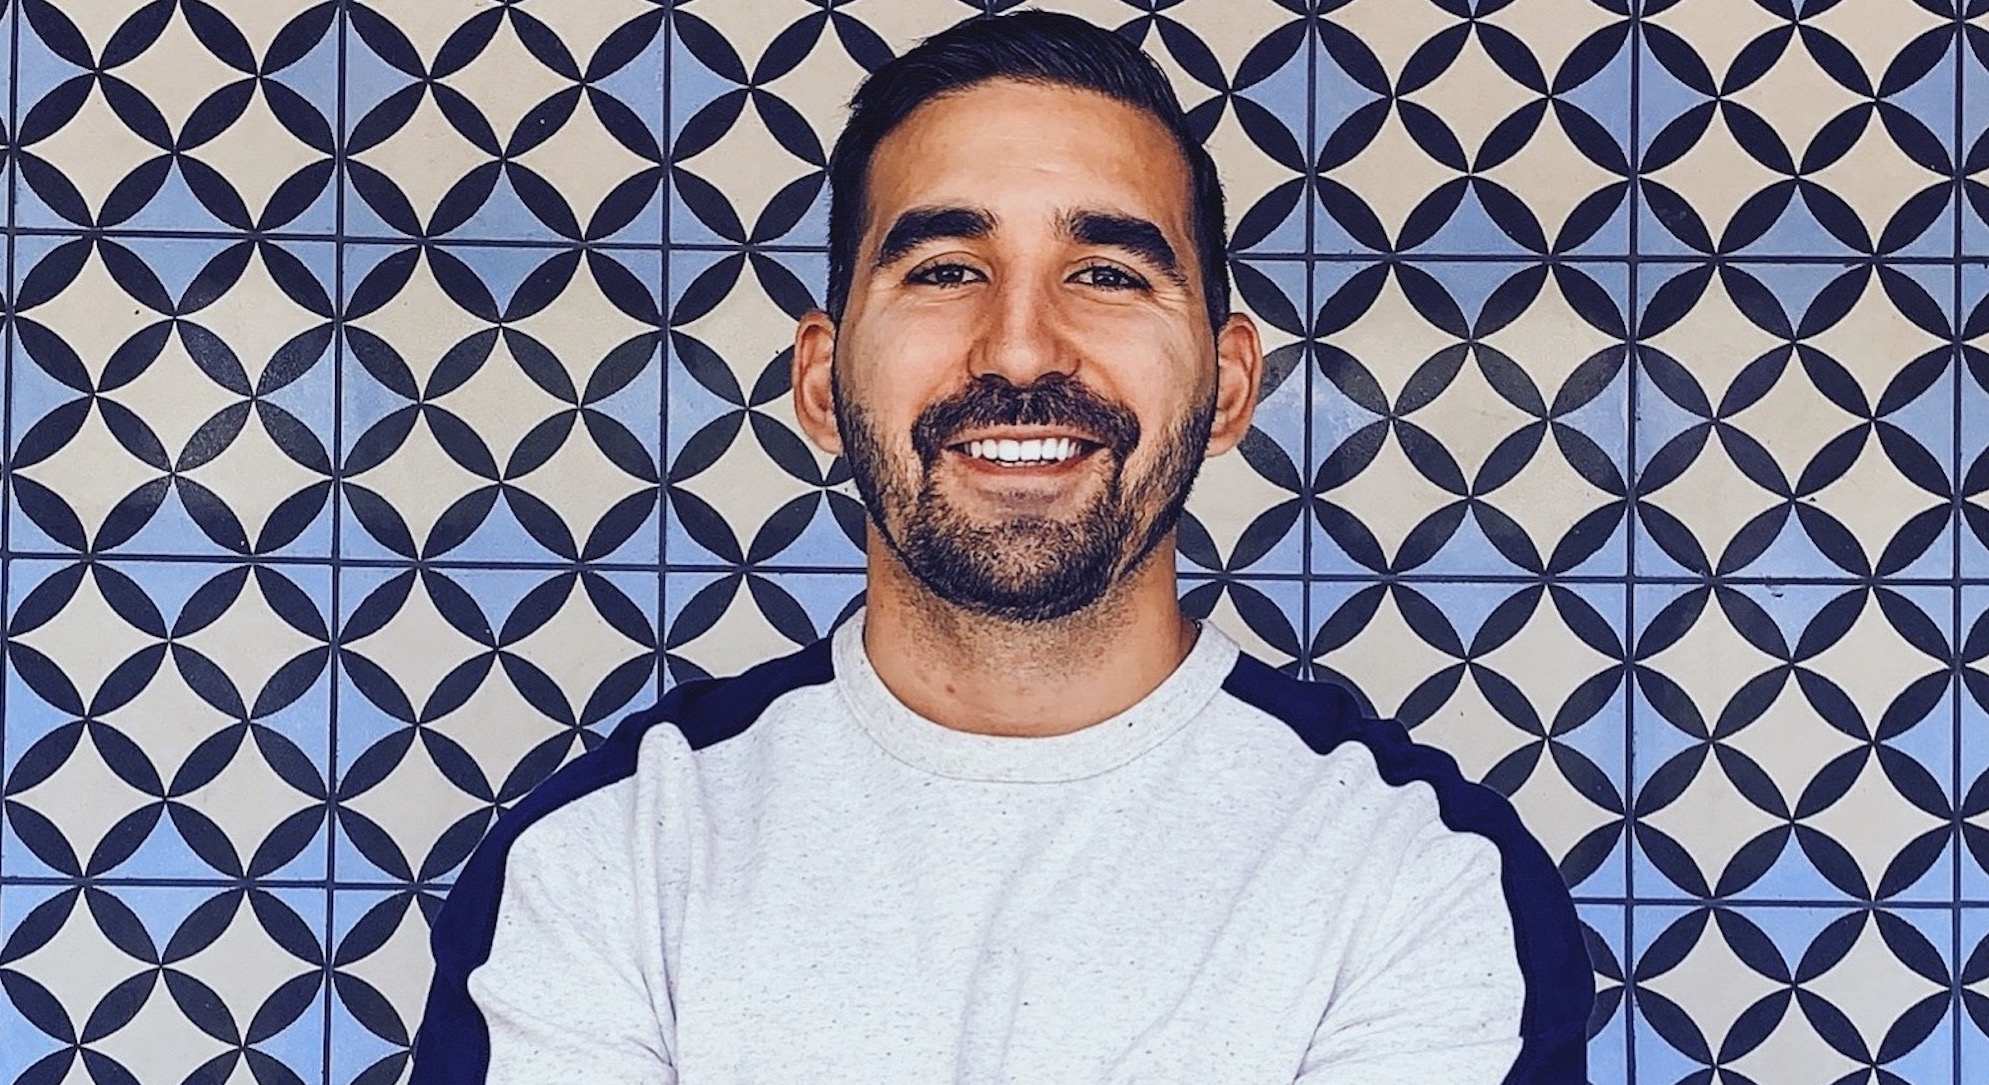 Pictured: 2022 40 Under 40 winner Gerardo Gandy, Assoc. AIA, AIGA, Associate and Brand Experience Practice Area Leader with Gensler, based in the firm's Austin, Texas, office.